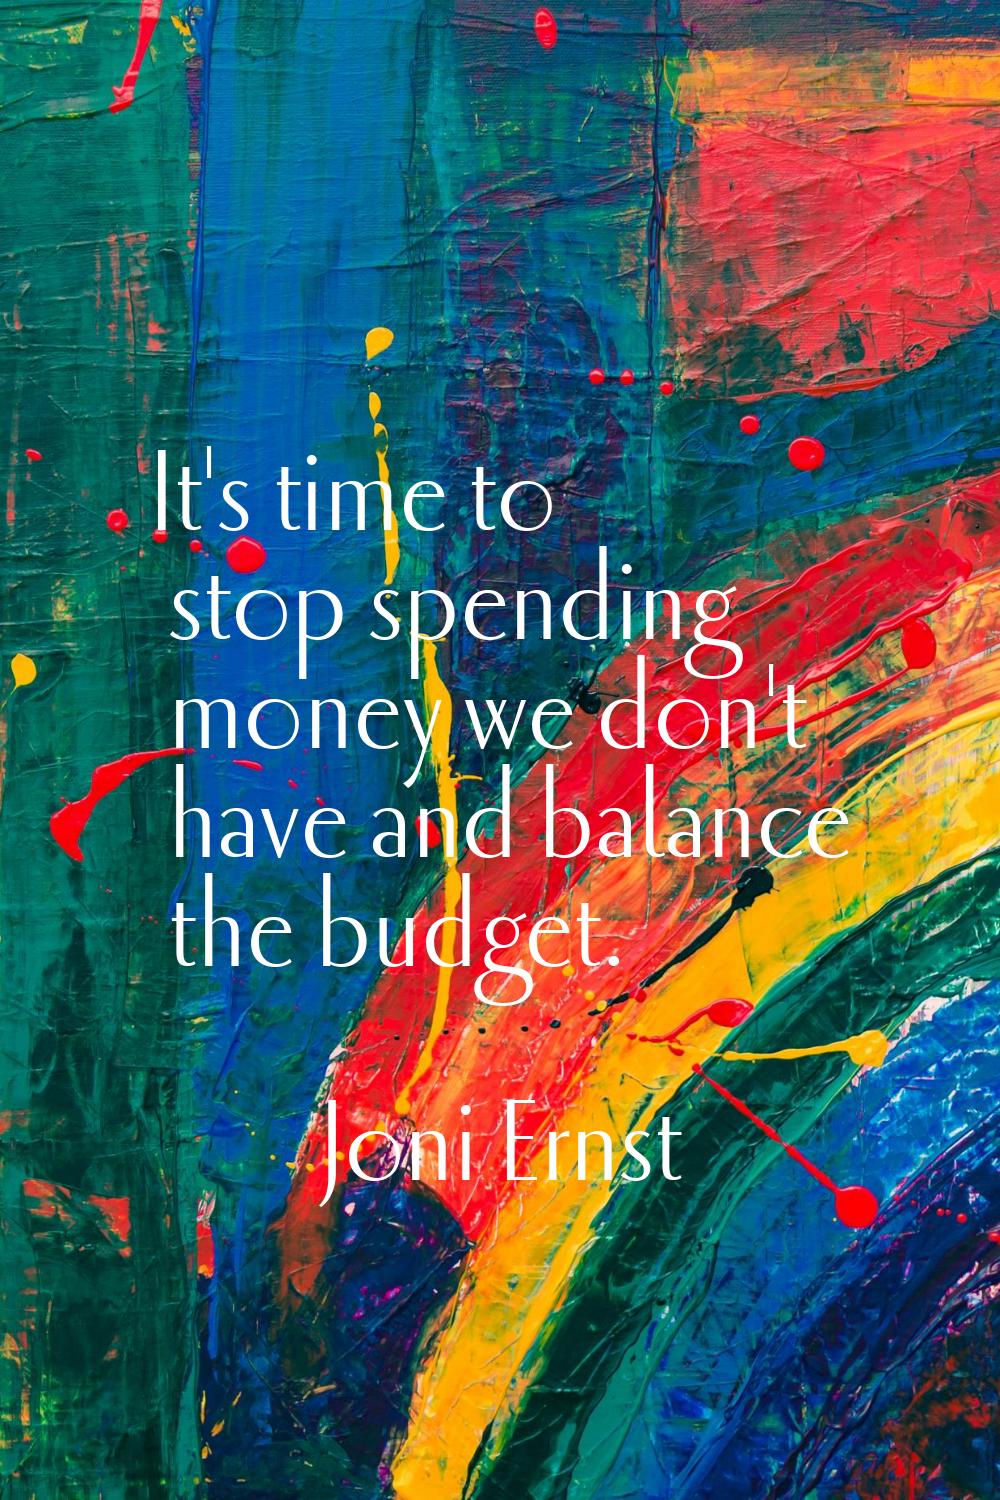 It's time to stop spending money we don't have and balance the budget.